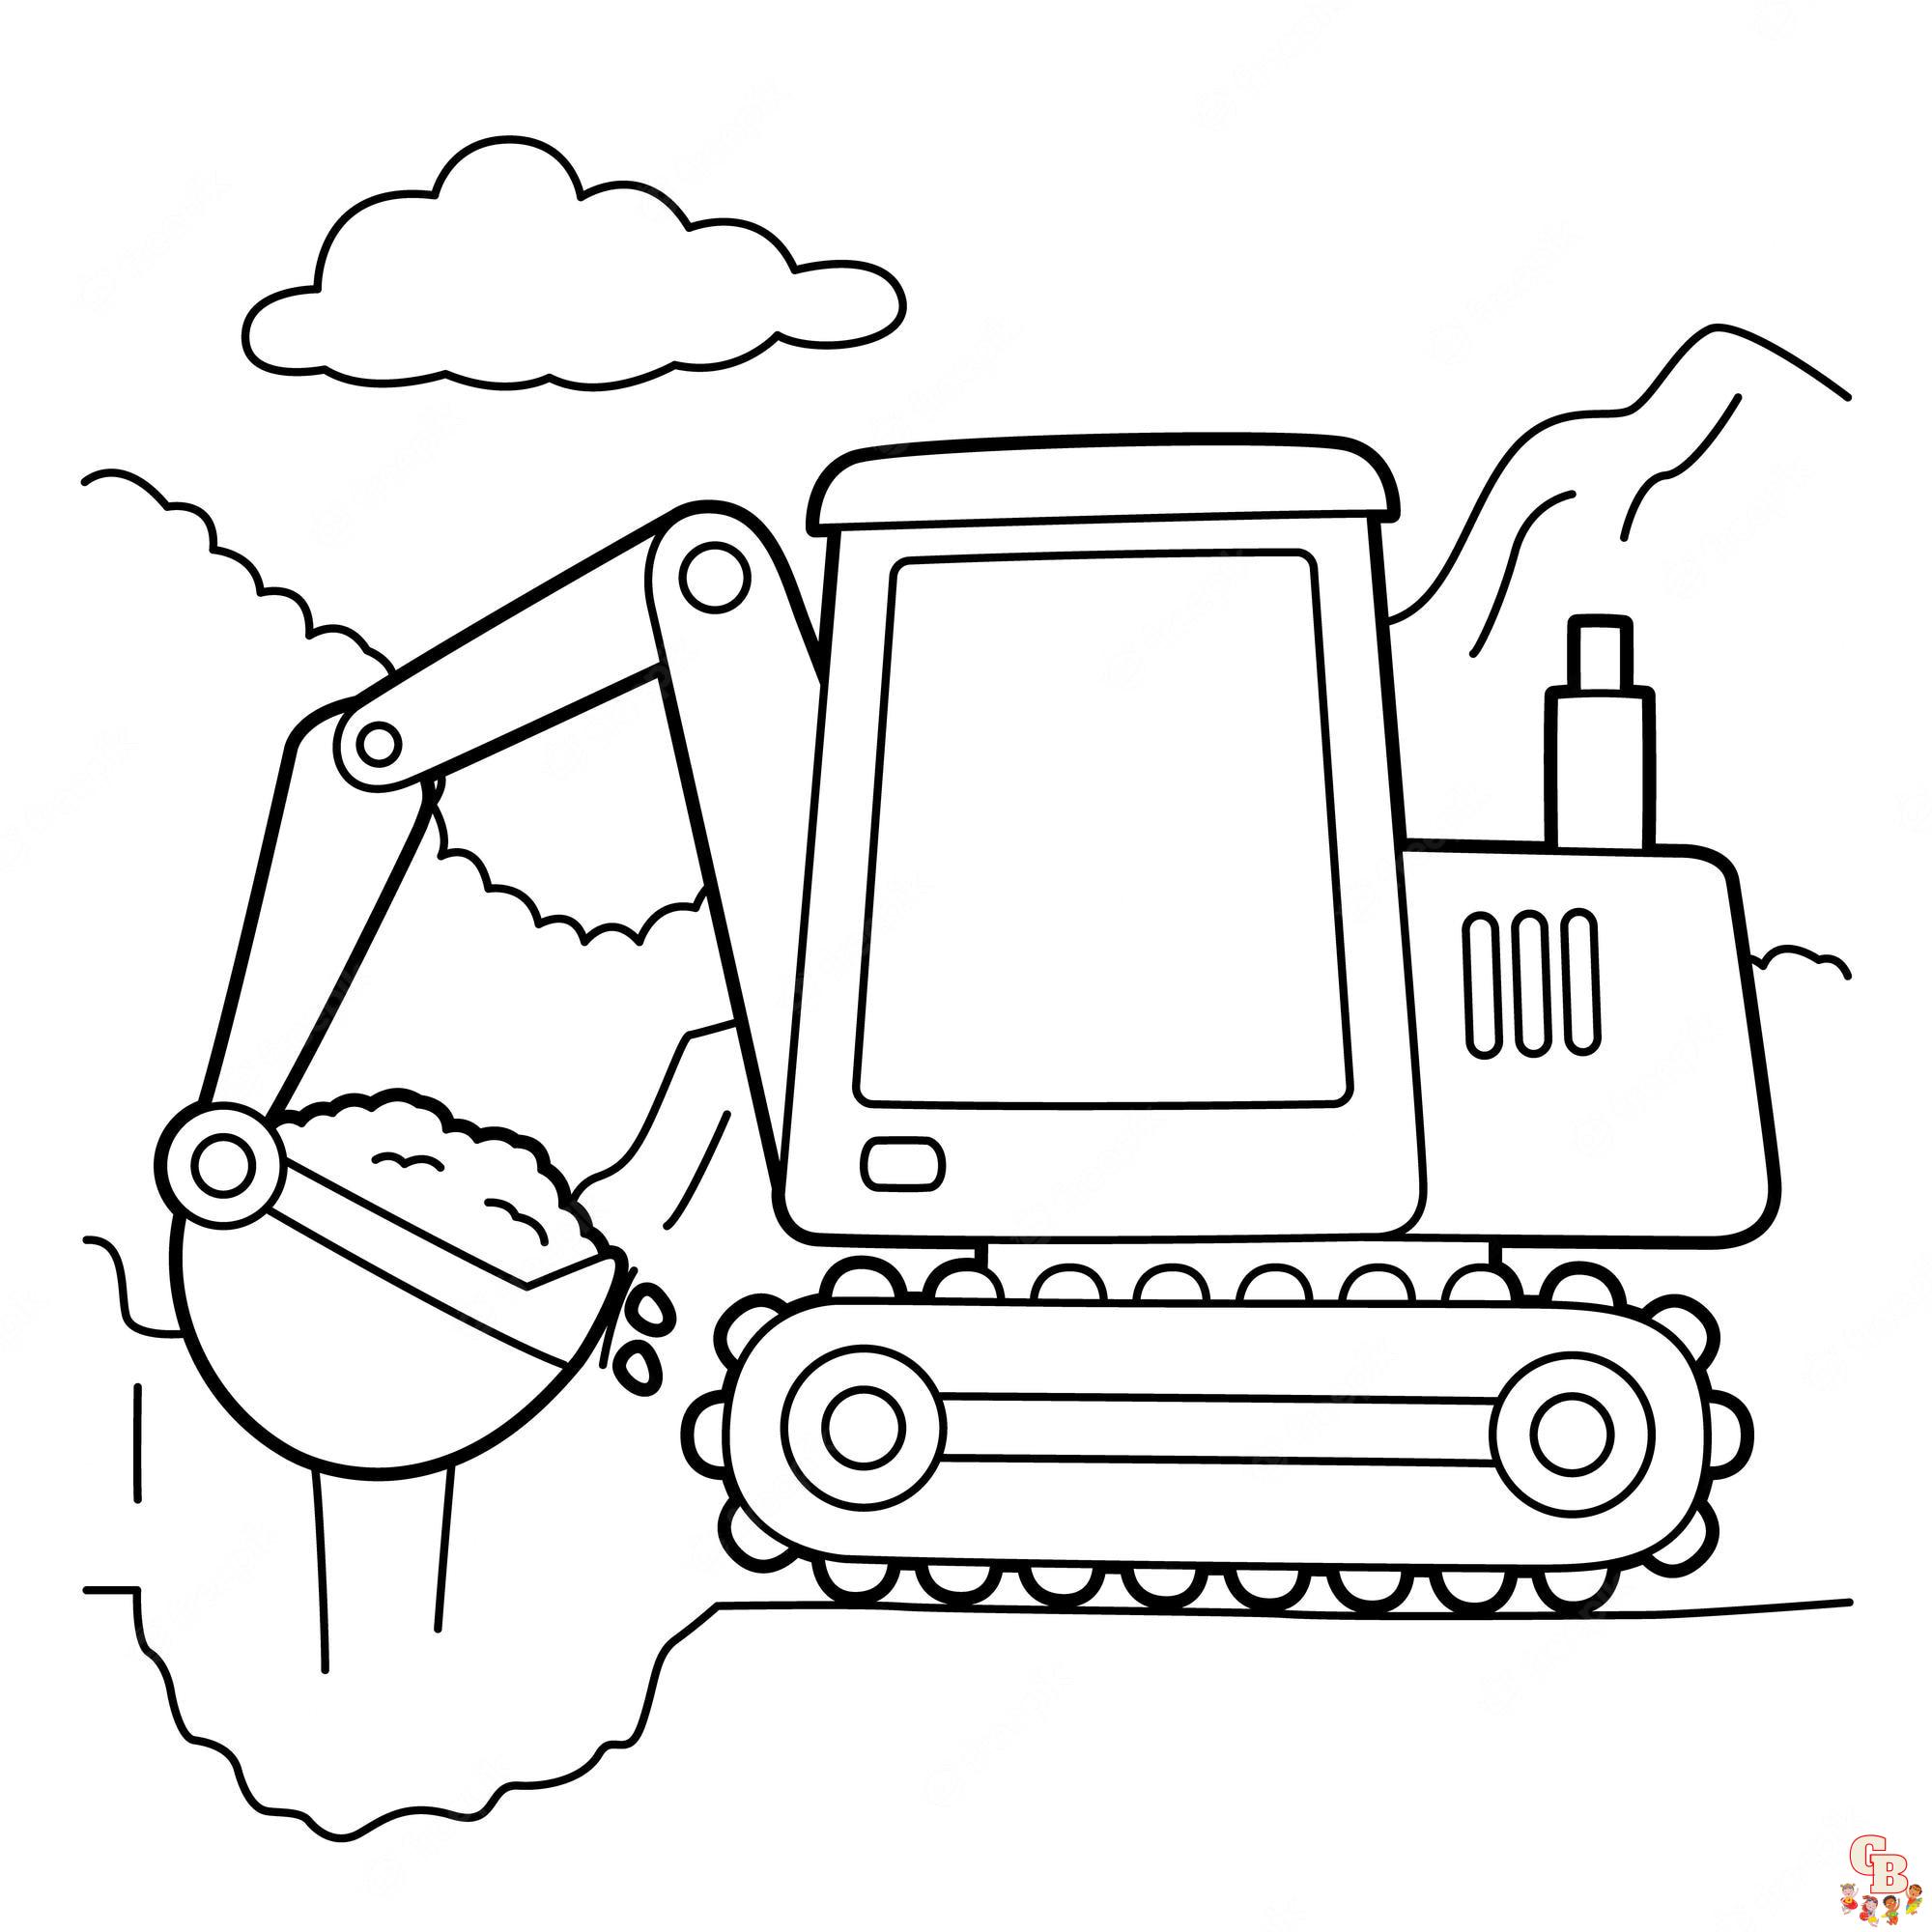 Enjoy coloring excavators with exciting excavator coloring pages